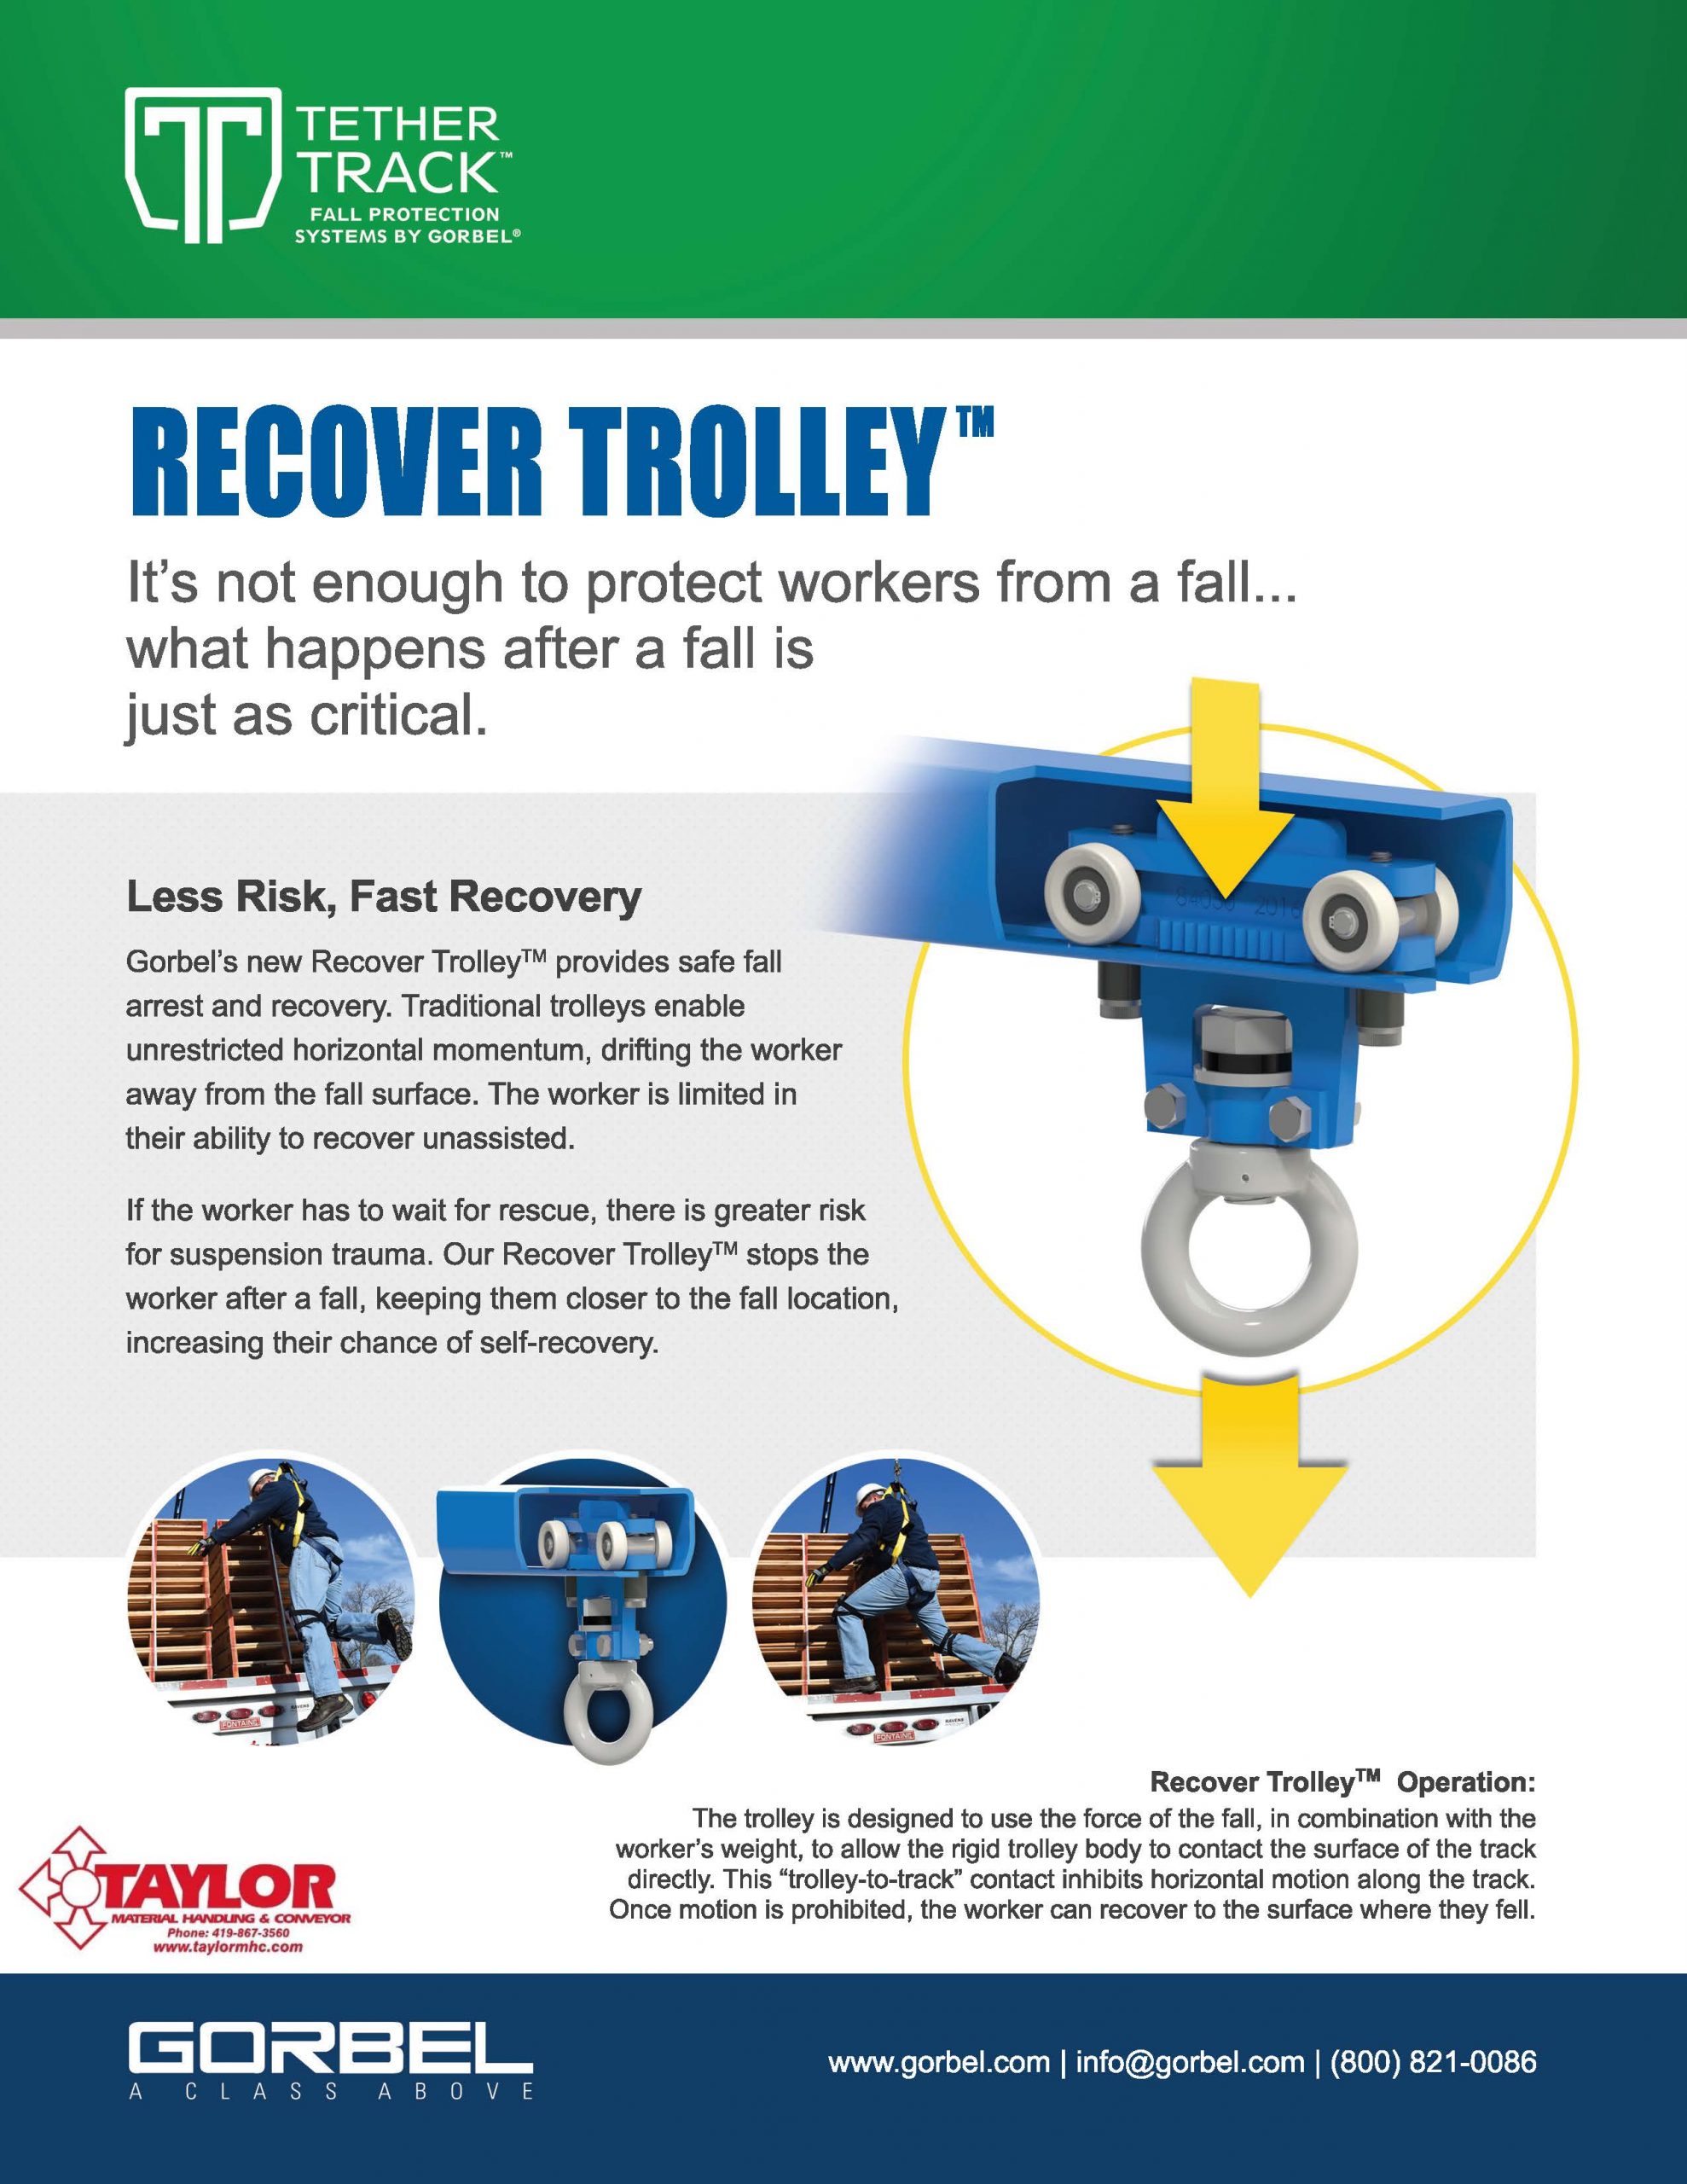 Gorbel Tether Track Recovery Trolley